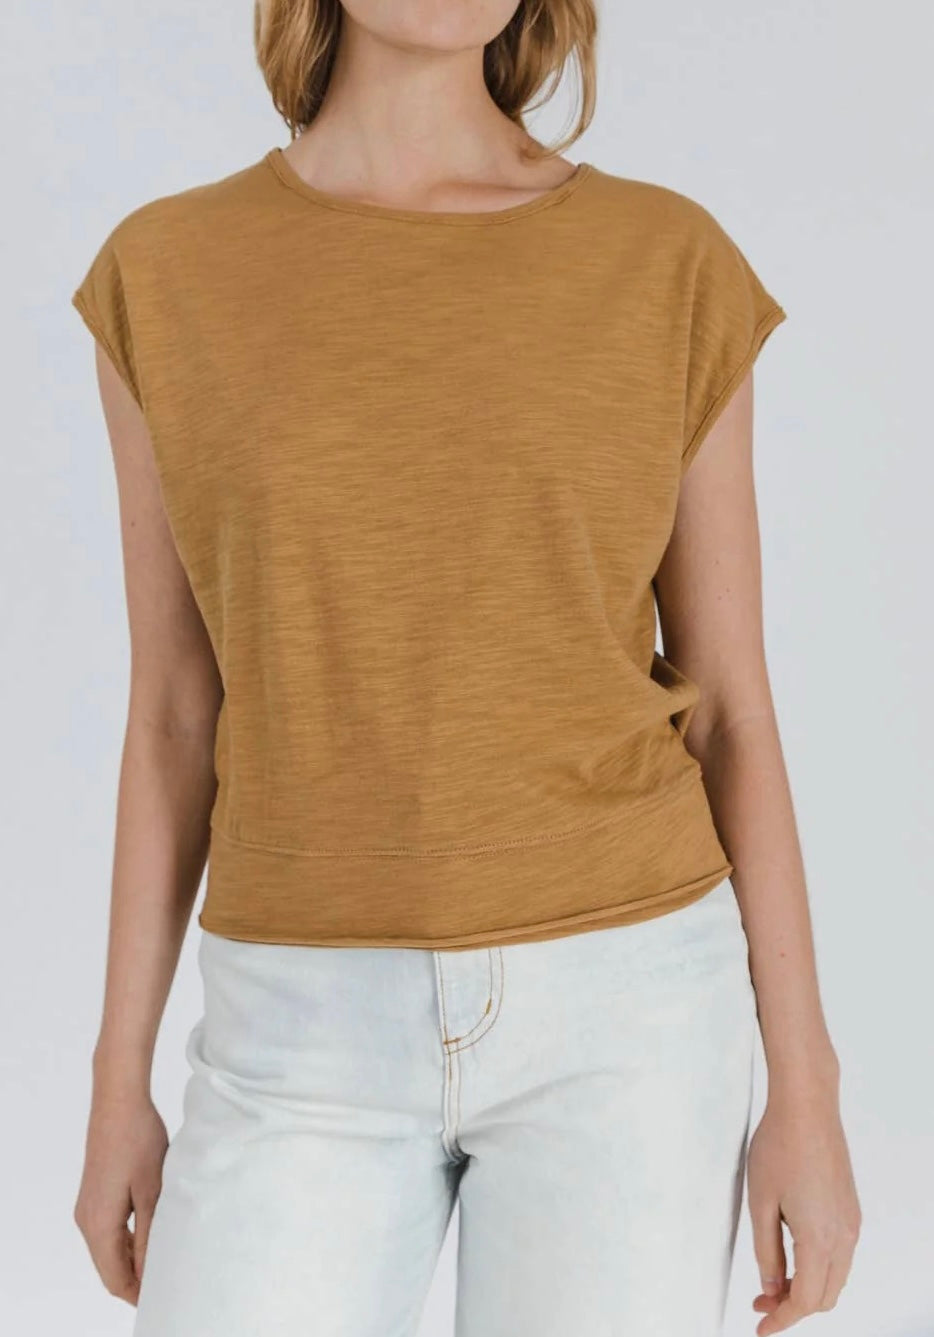 Mod Ref The Noa Top in Taupe